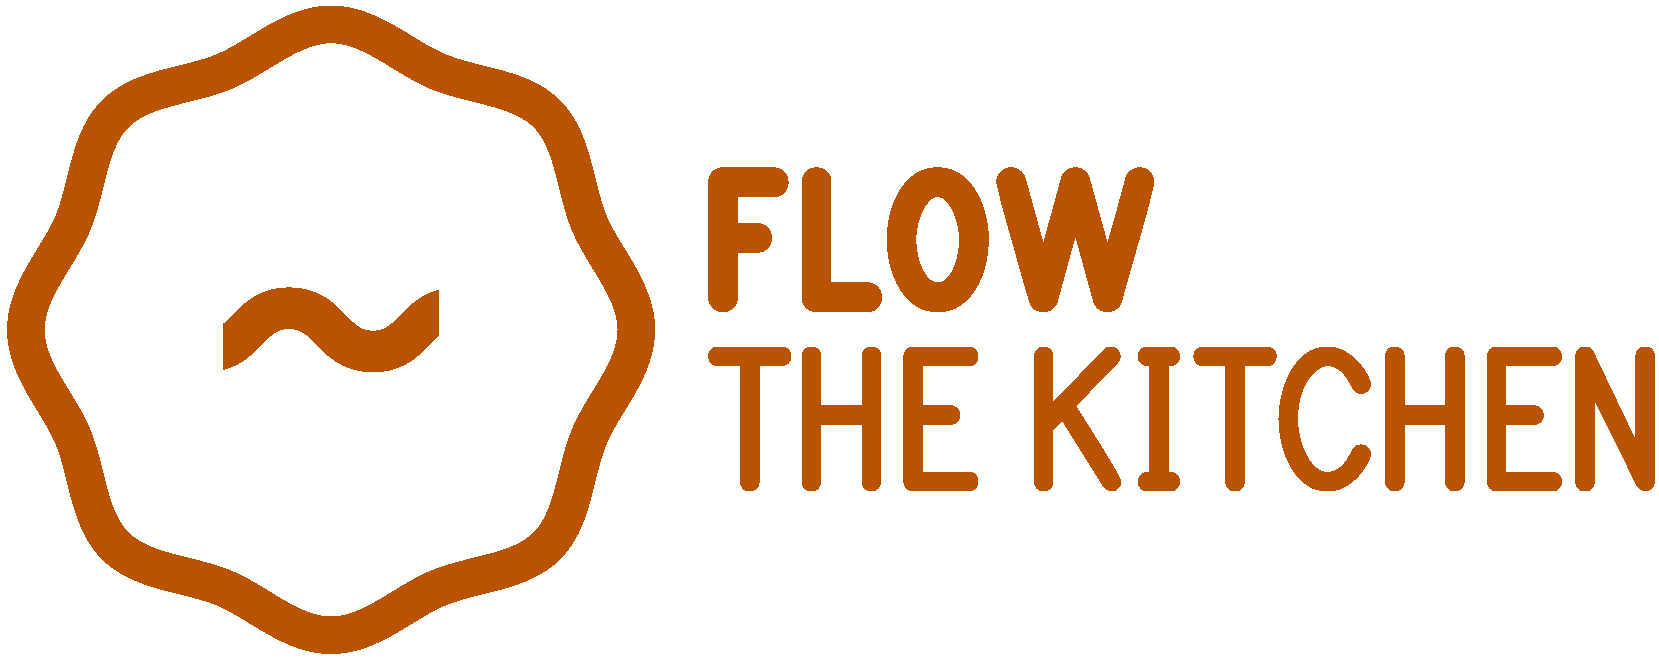 FLOW THE KITCHEN | Catering Frankfurt | Event & Catering Service